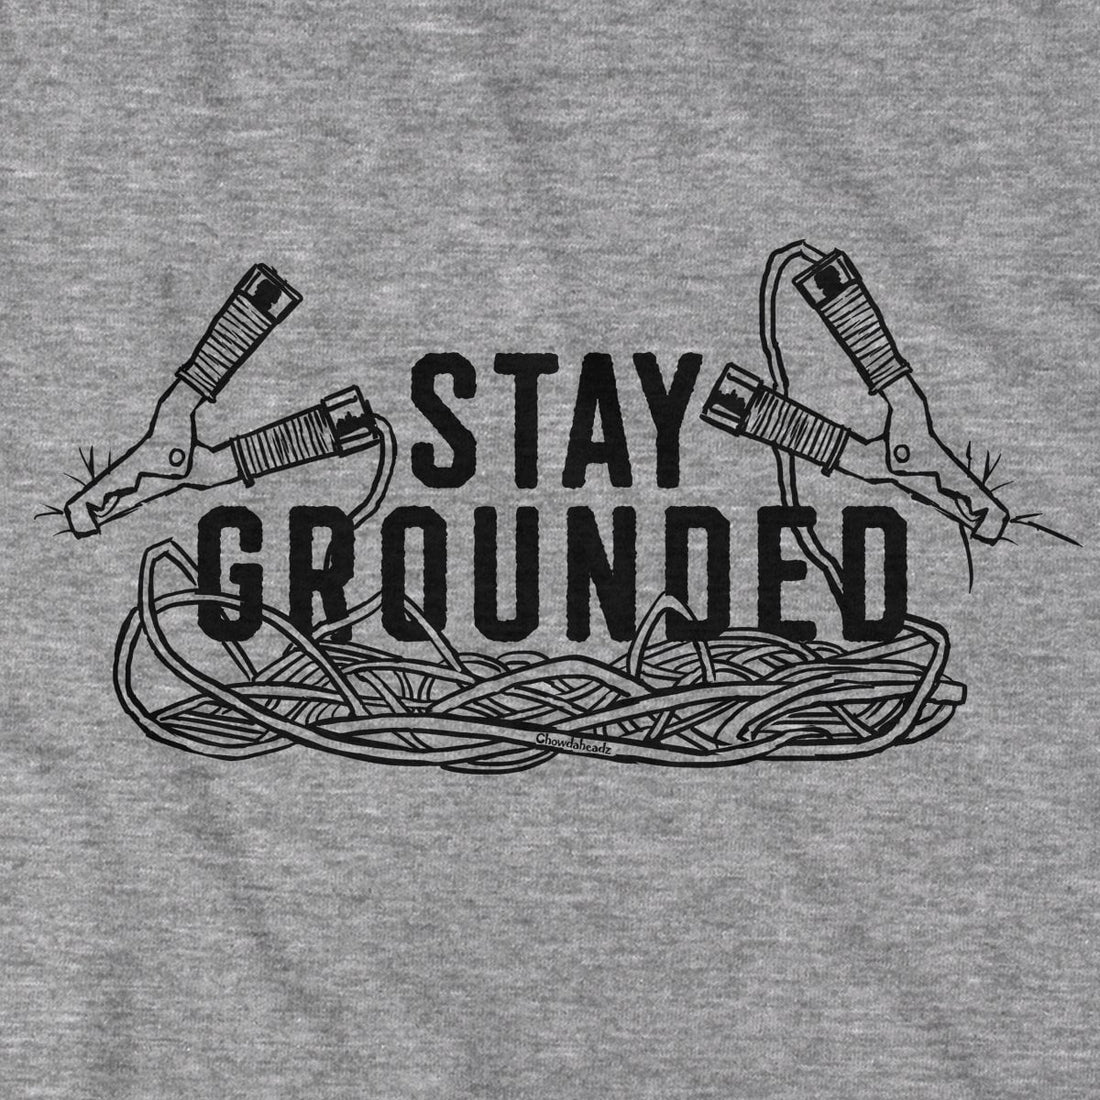 Stay Grounded T-Shirt - Chowdaheadz